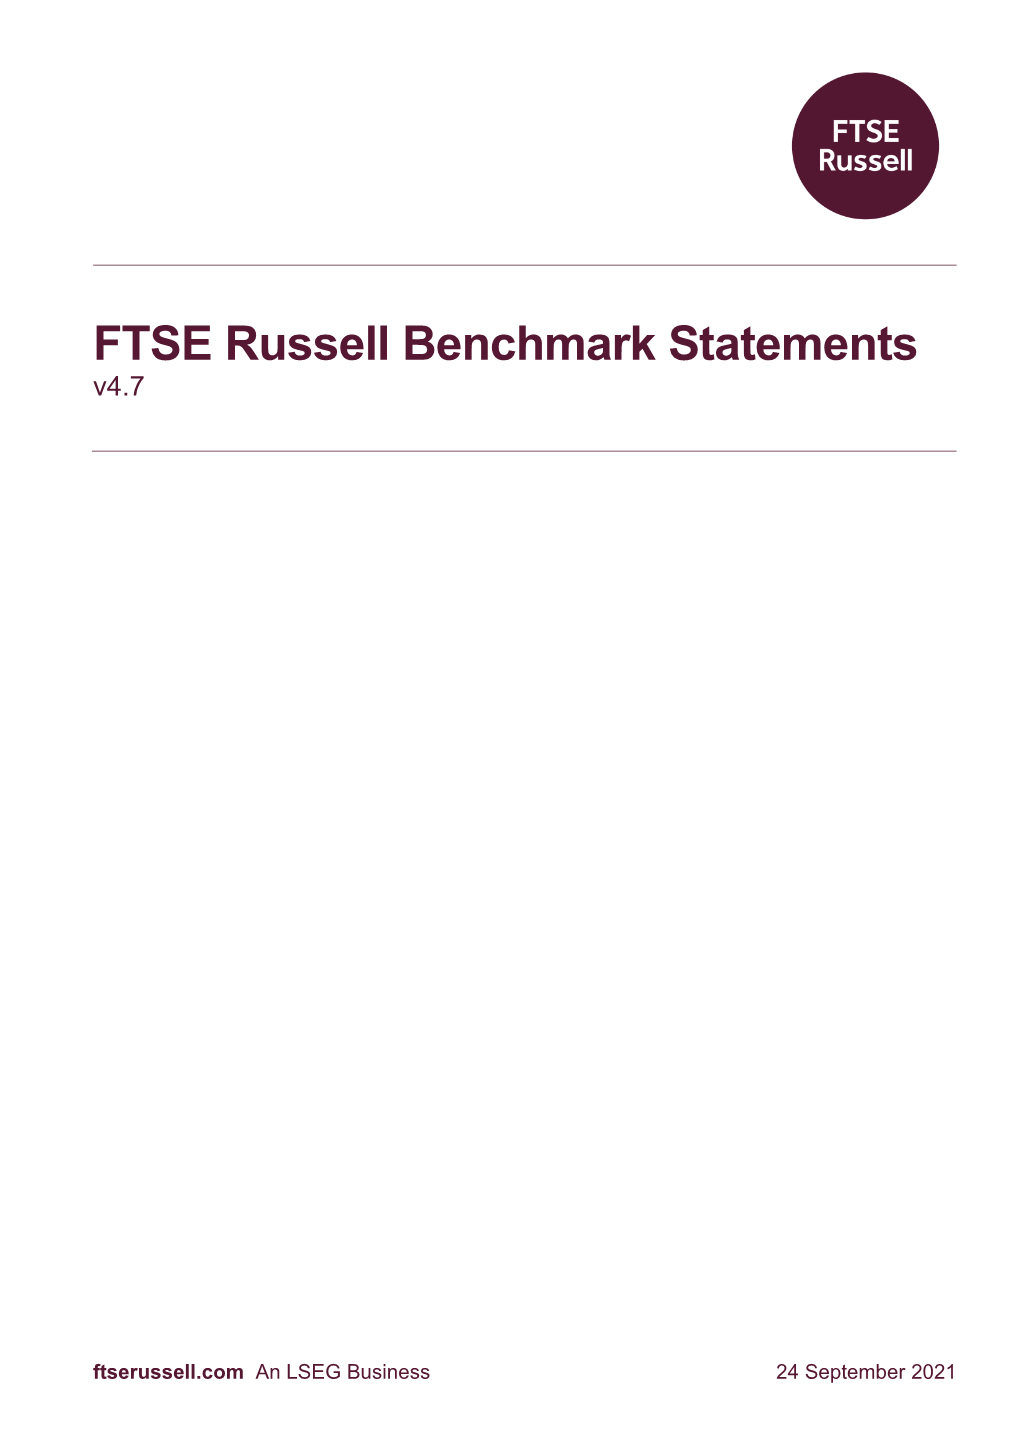 FTSE Russell Benchmark Statements V4.7